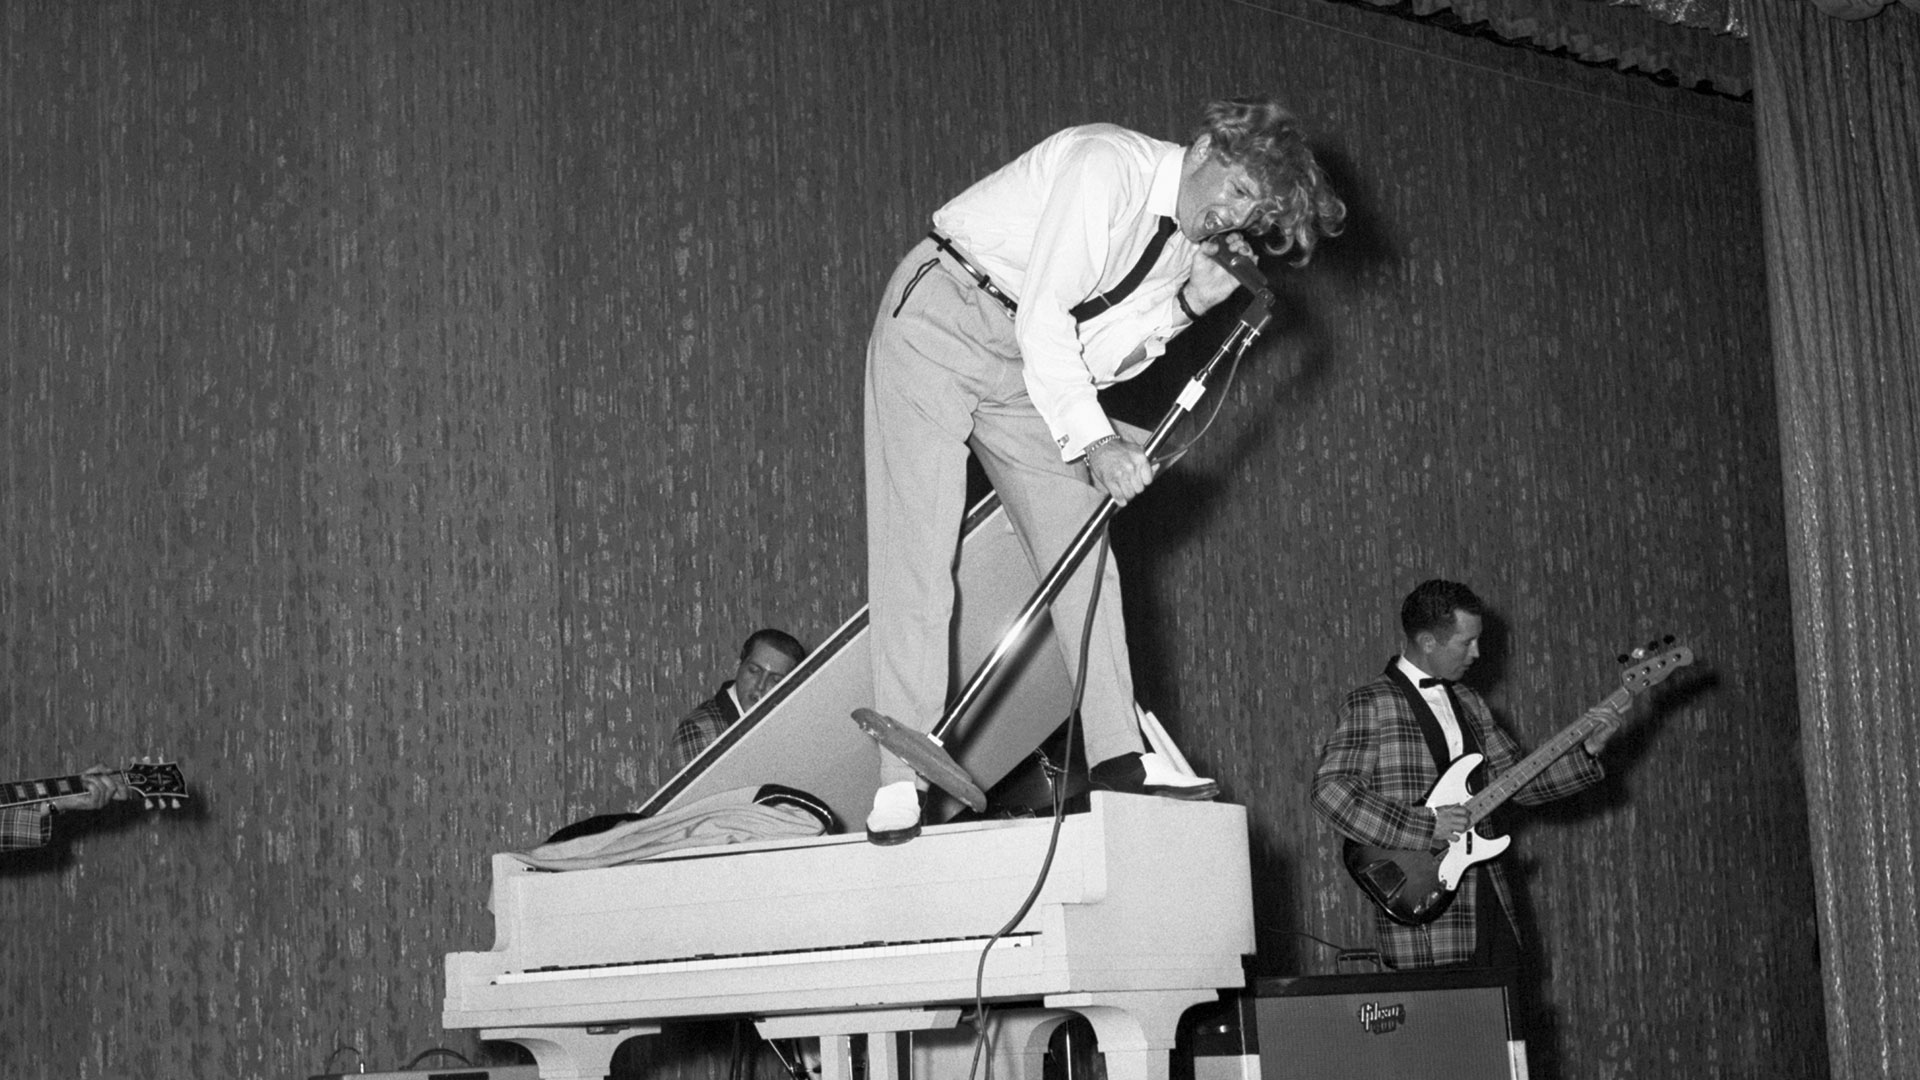 Standing on a piano, Jerry Lee Lewis gives a rousing performance at New York's Cafe de Paris on June 10, 1958 (Bettmann)